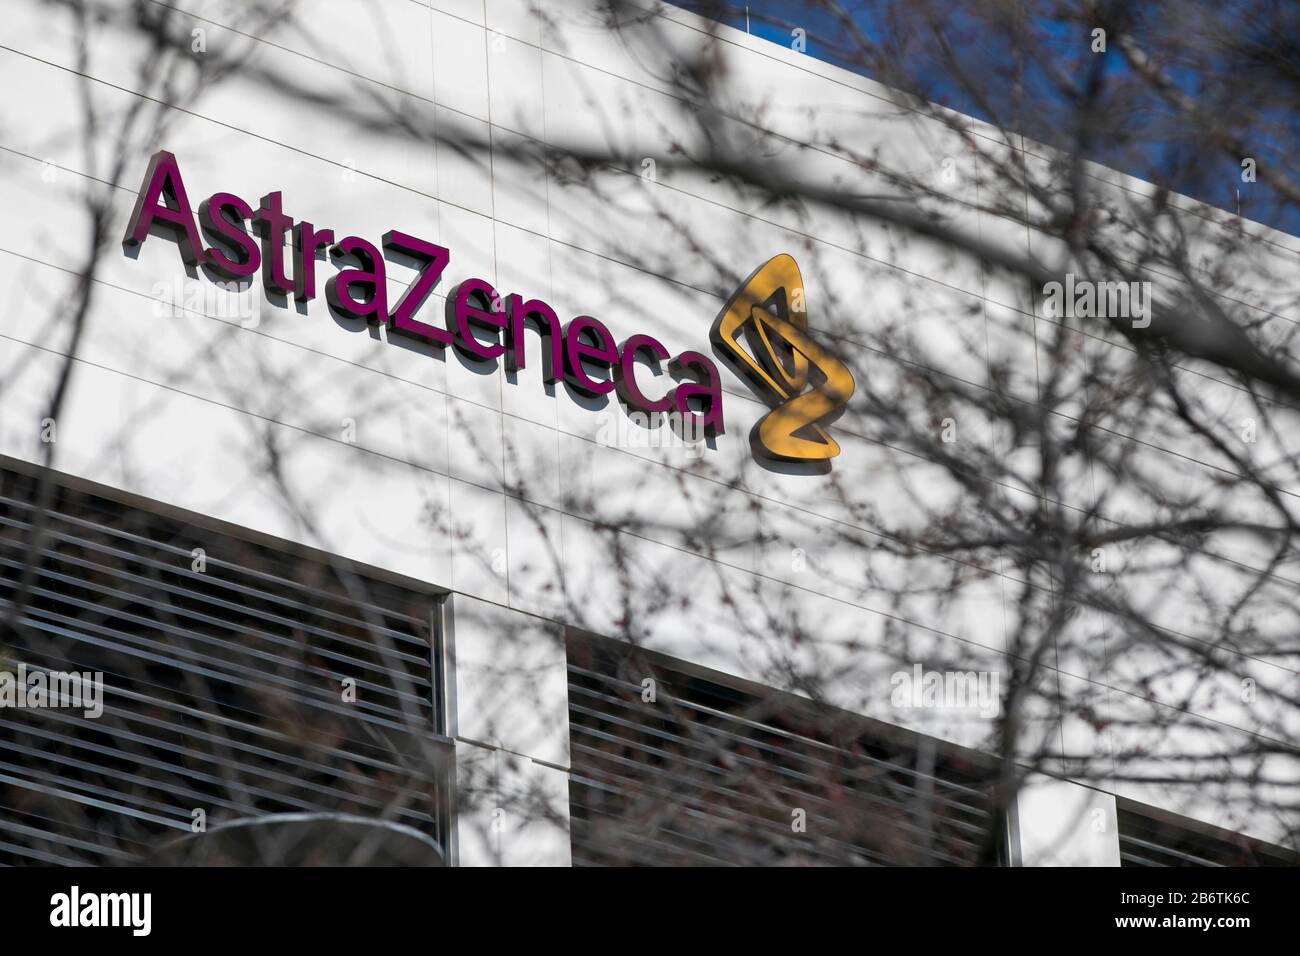 A logo sign outside of a facility occupied by AstraZeneca in Germantown, Maryland on March 8, 2020. Stock Photo